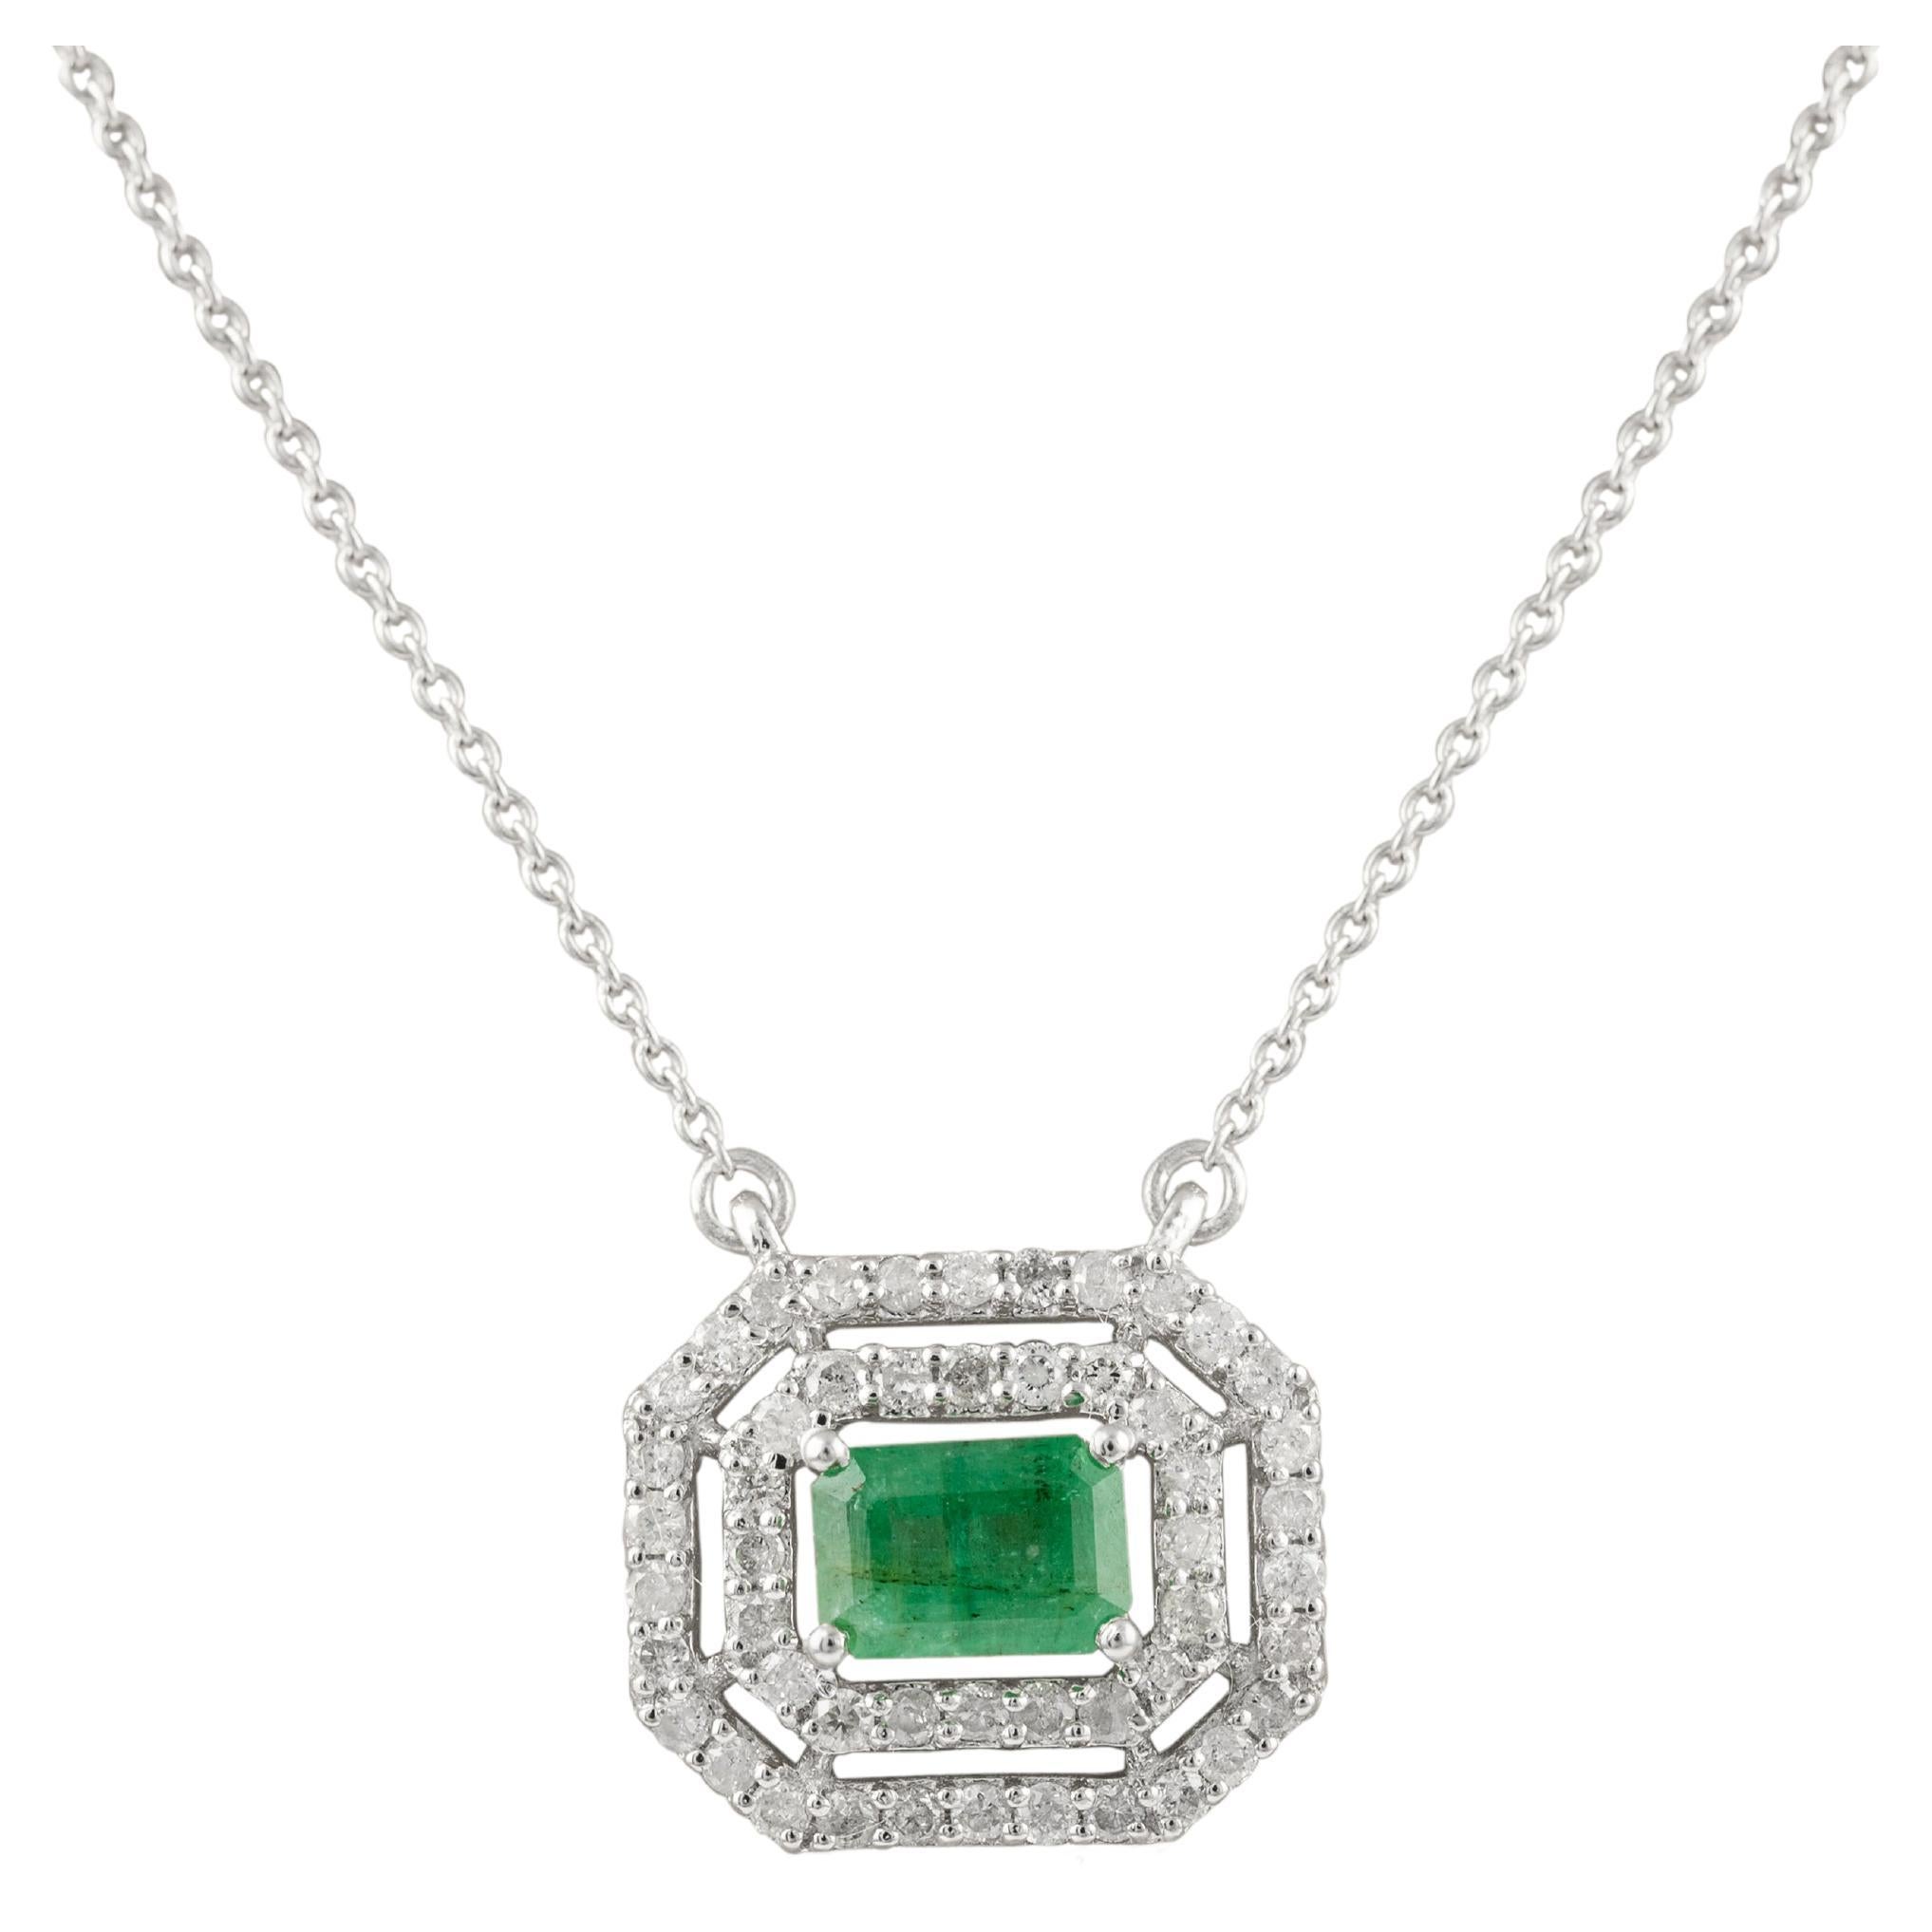 Brilliant Emerald Diamond Pendant Necklace 14k Solid White Gold, Gift For Sister For Sale